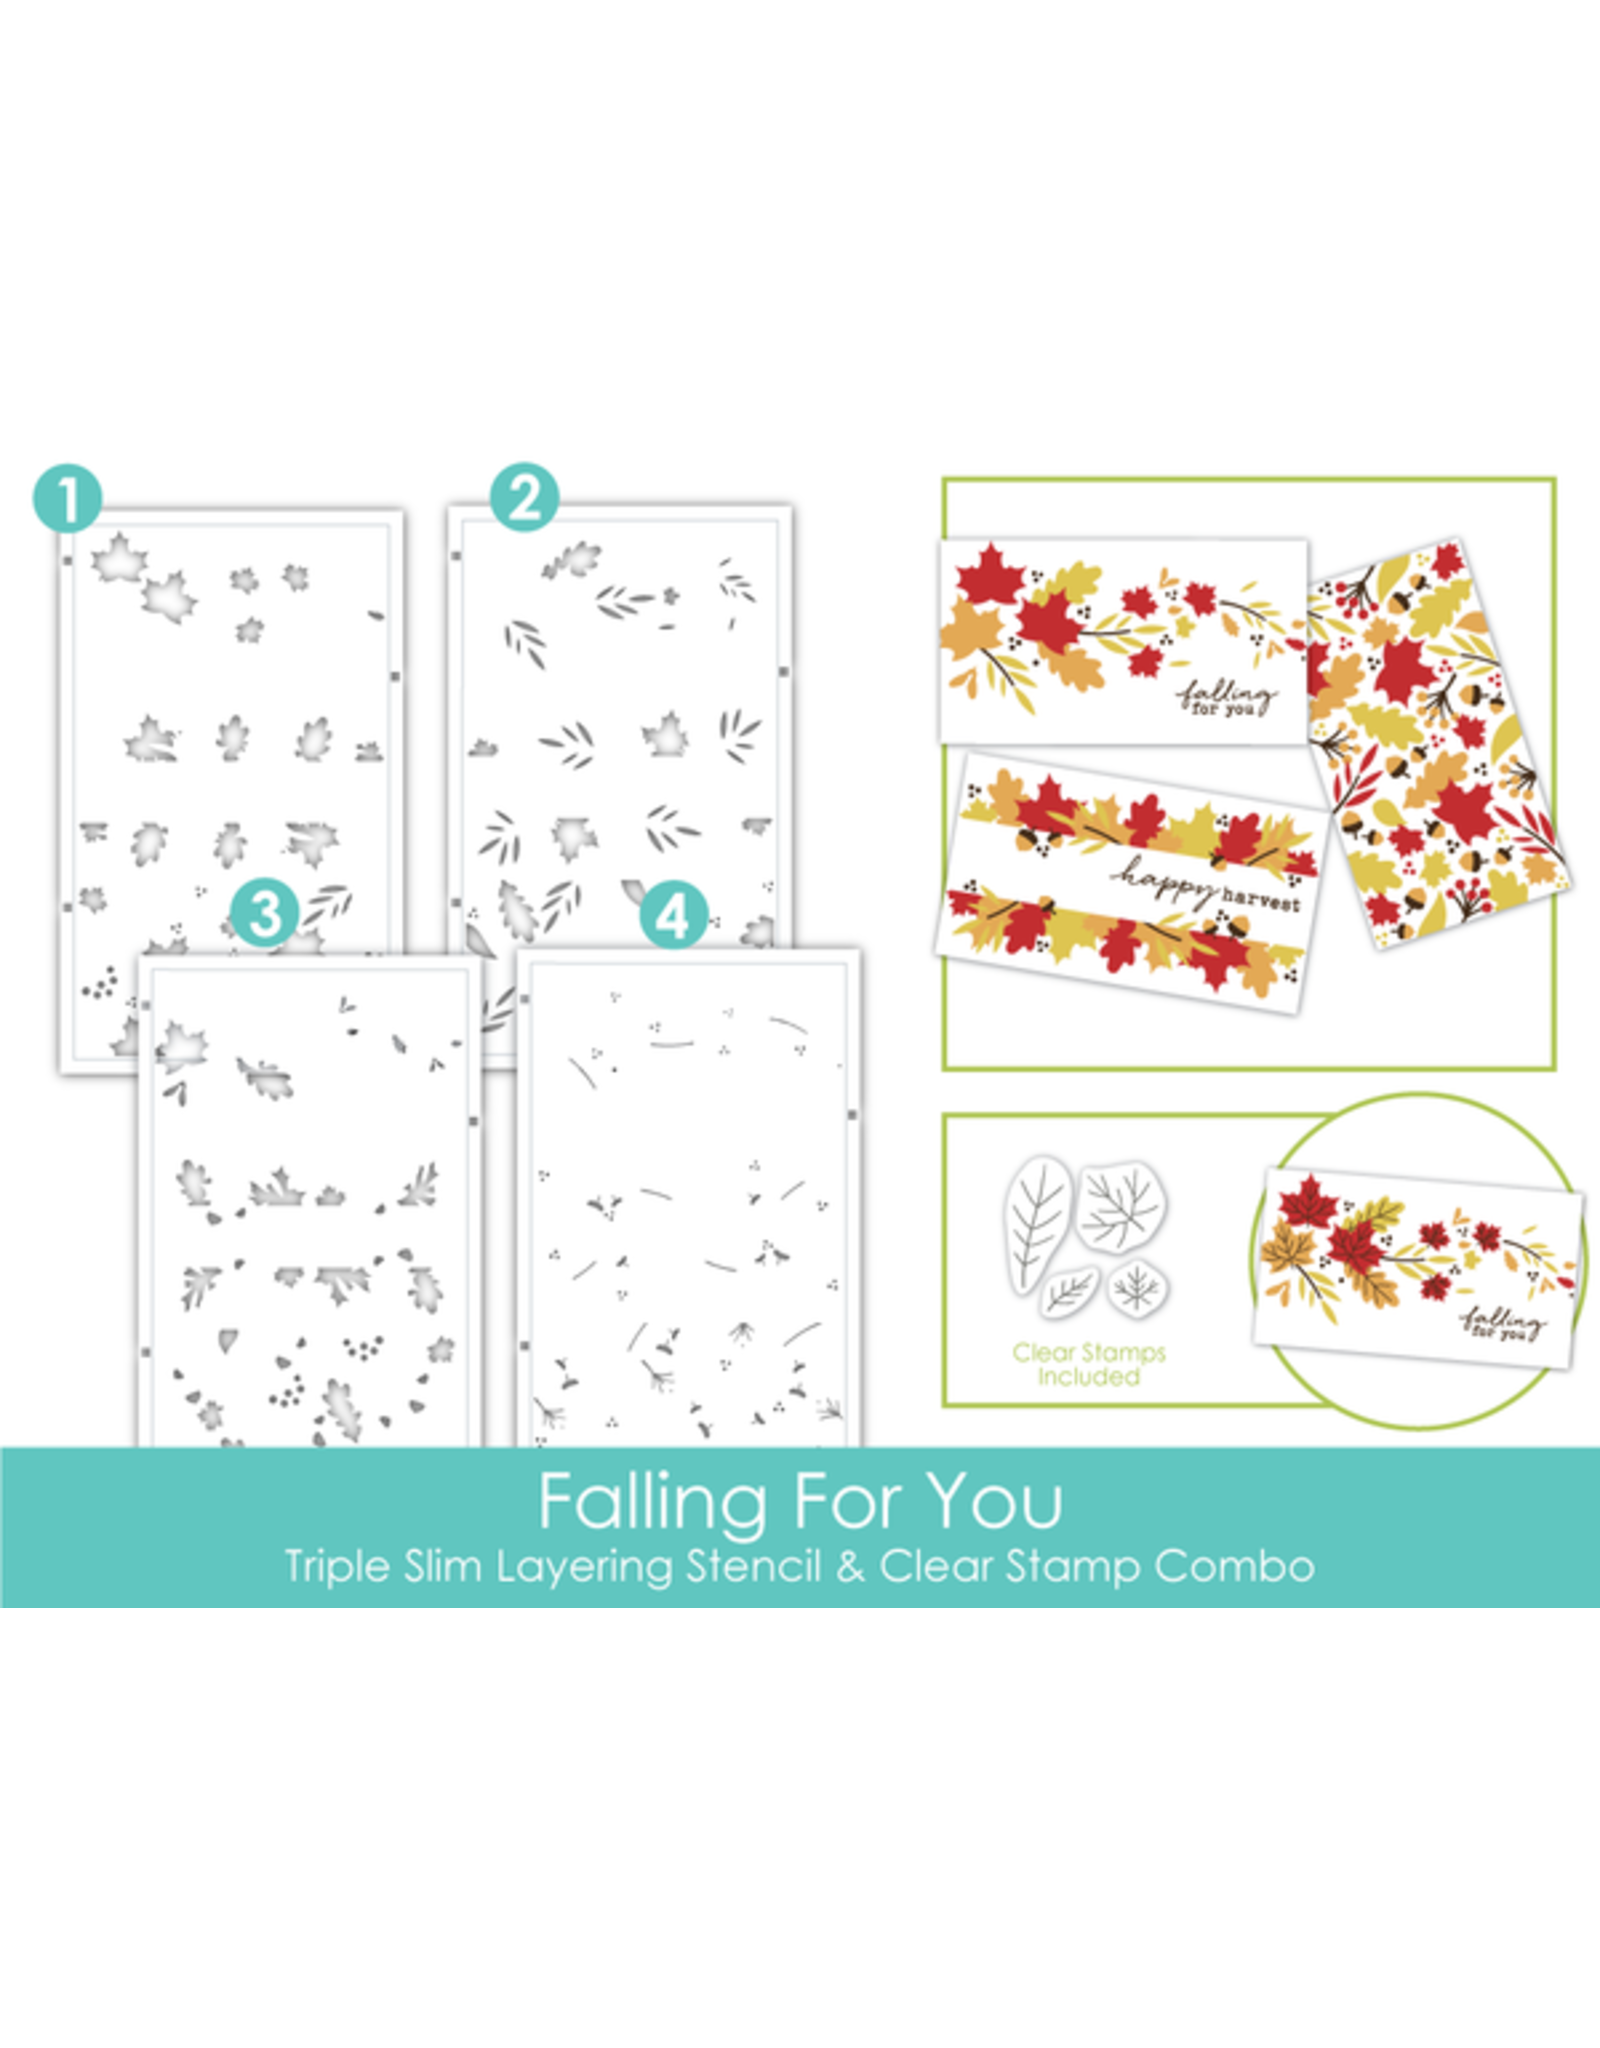 Taylored Expressions Triple Slim Layering Stencil- Falling For You + Clear Add-Ons